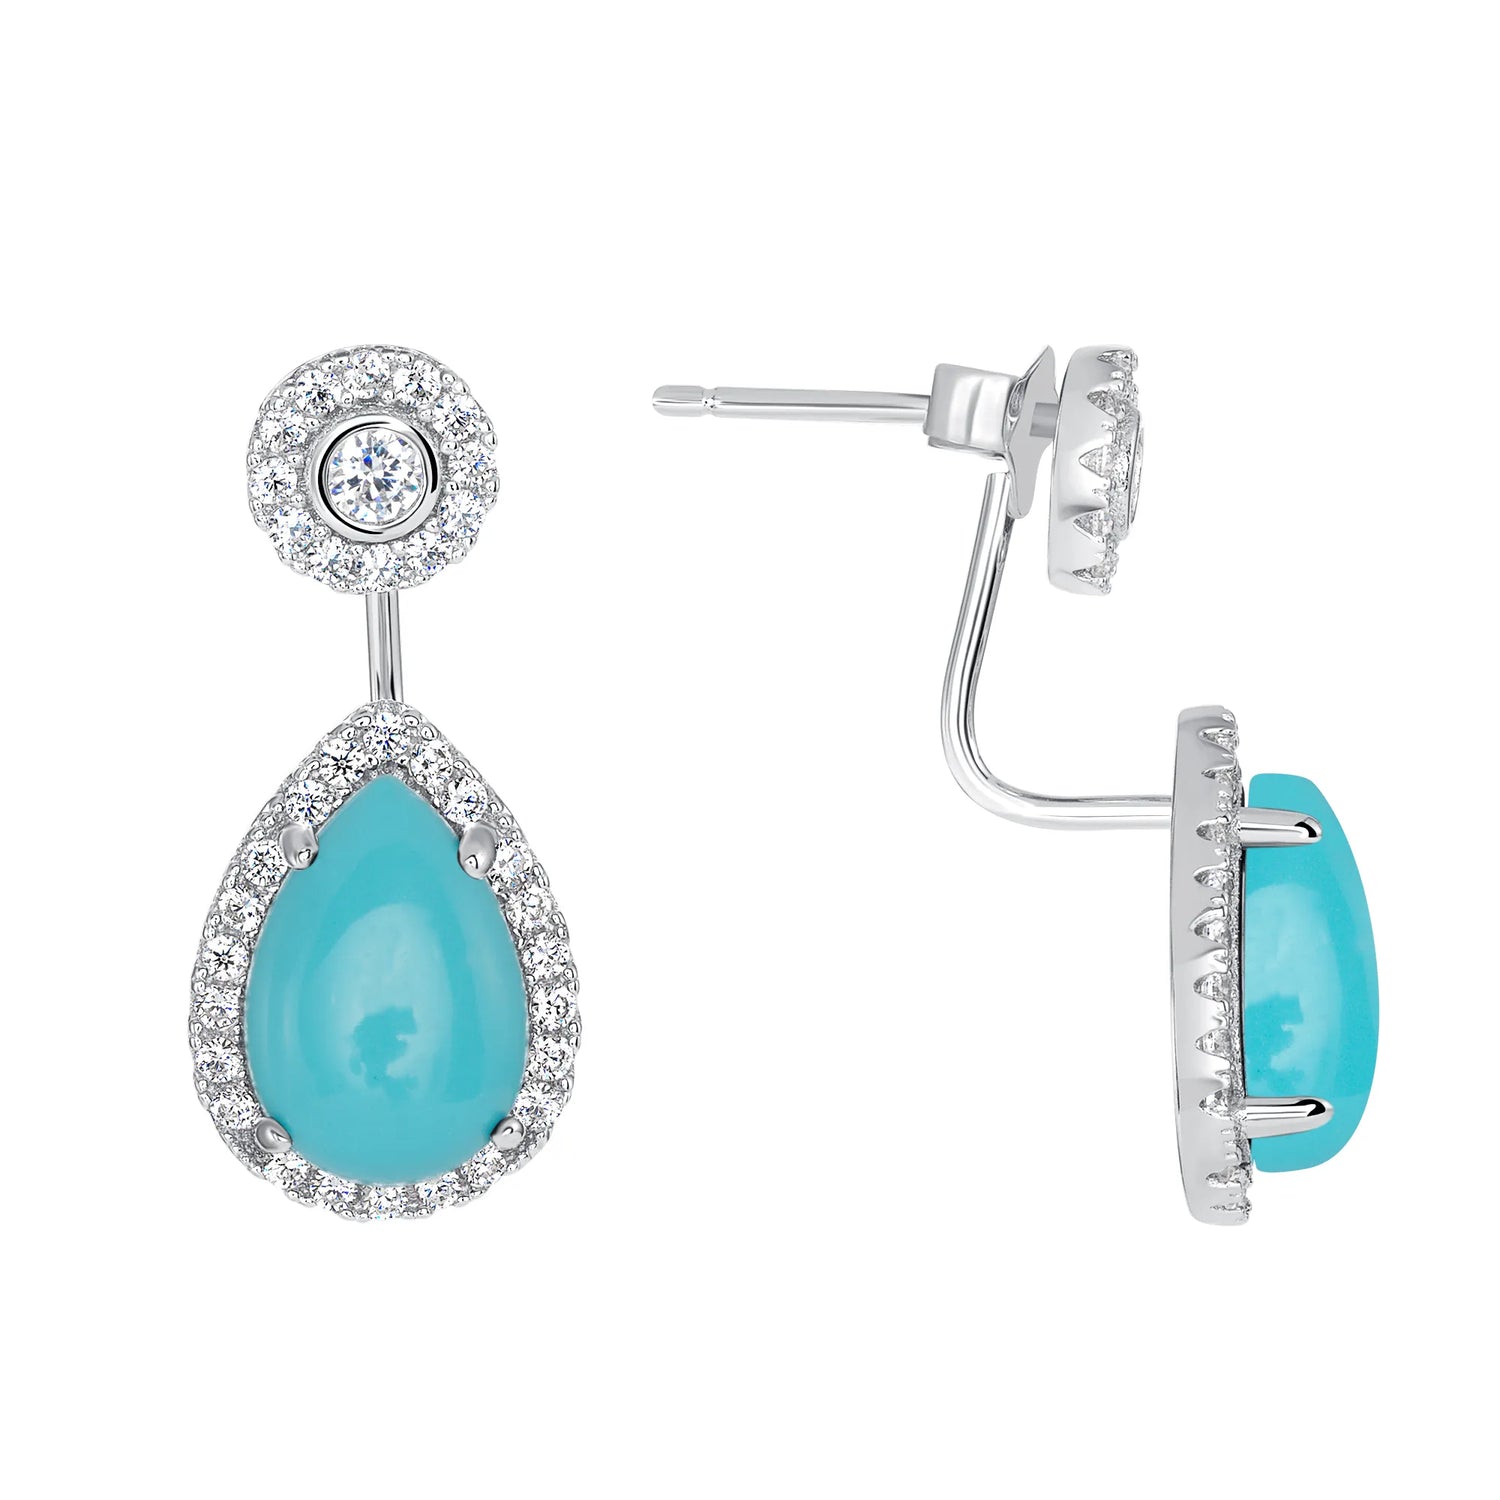 925 Sterling Silver Halo Pear Cut Gemstone and Round CZ Jacket Earrings